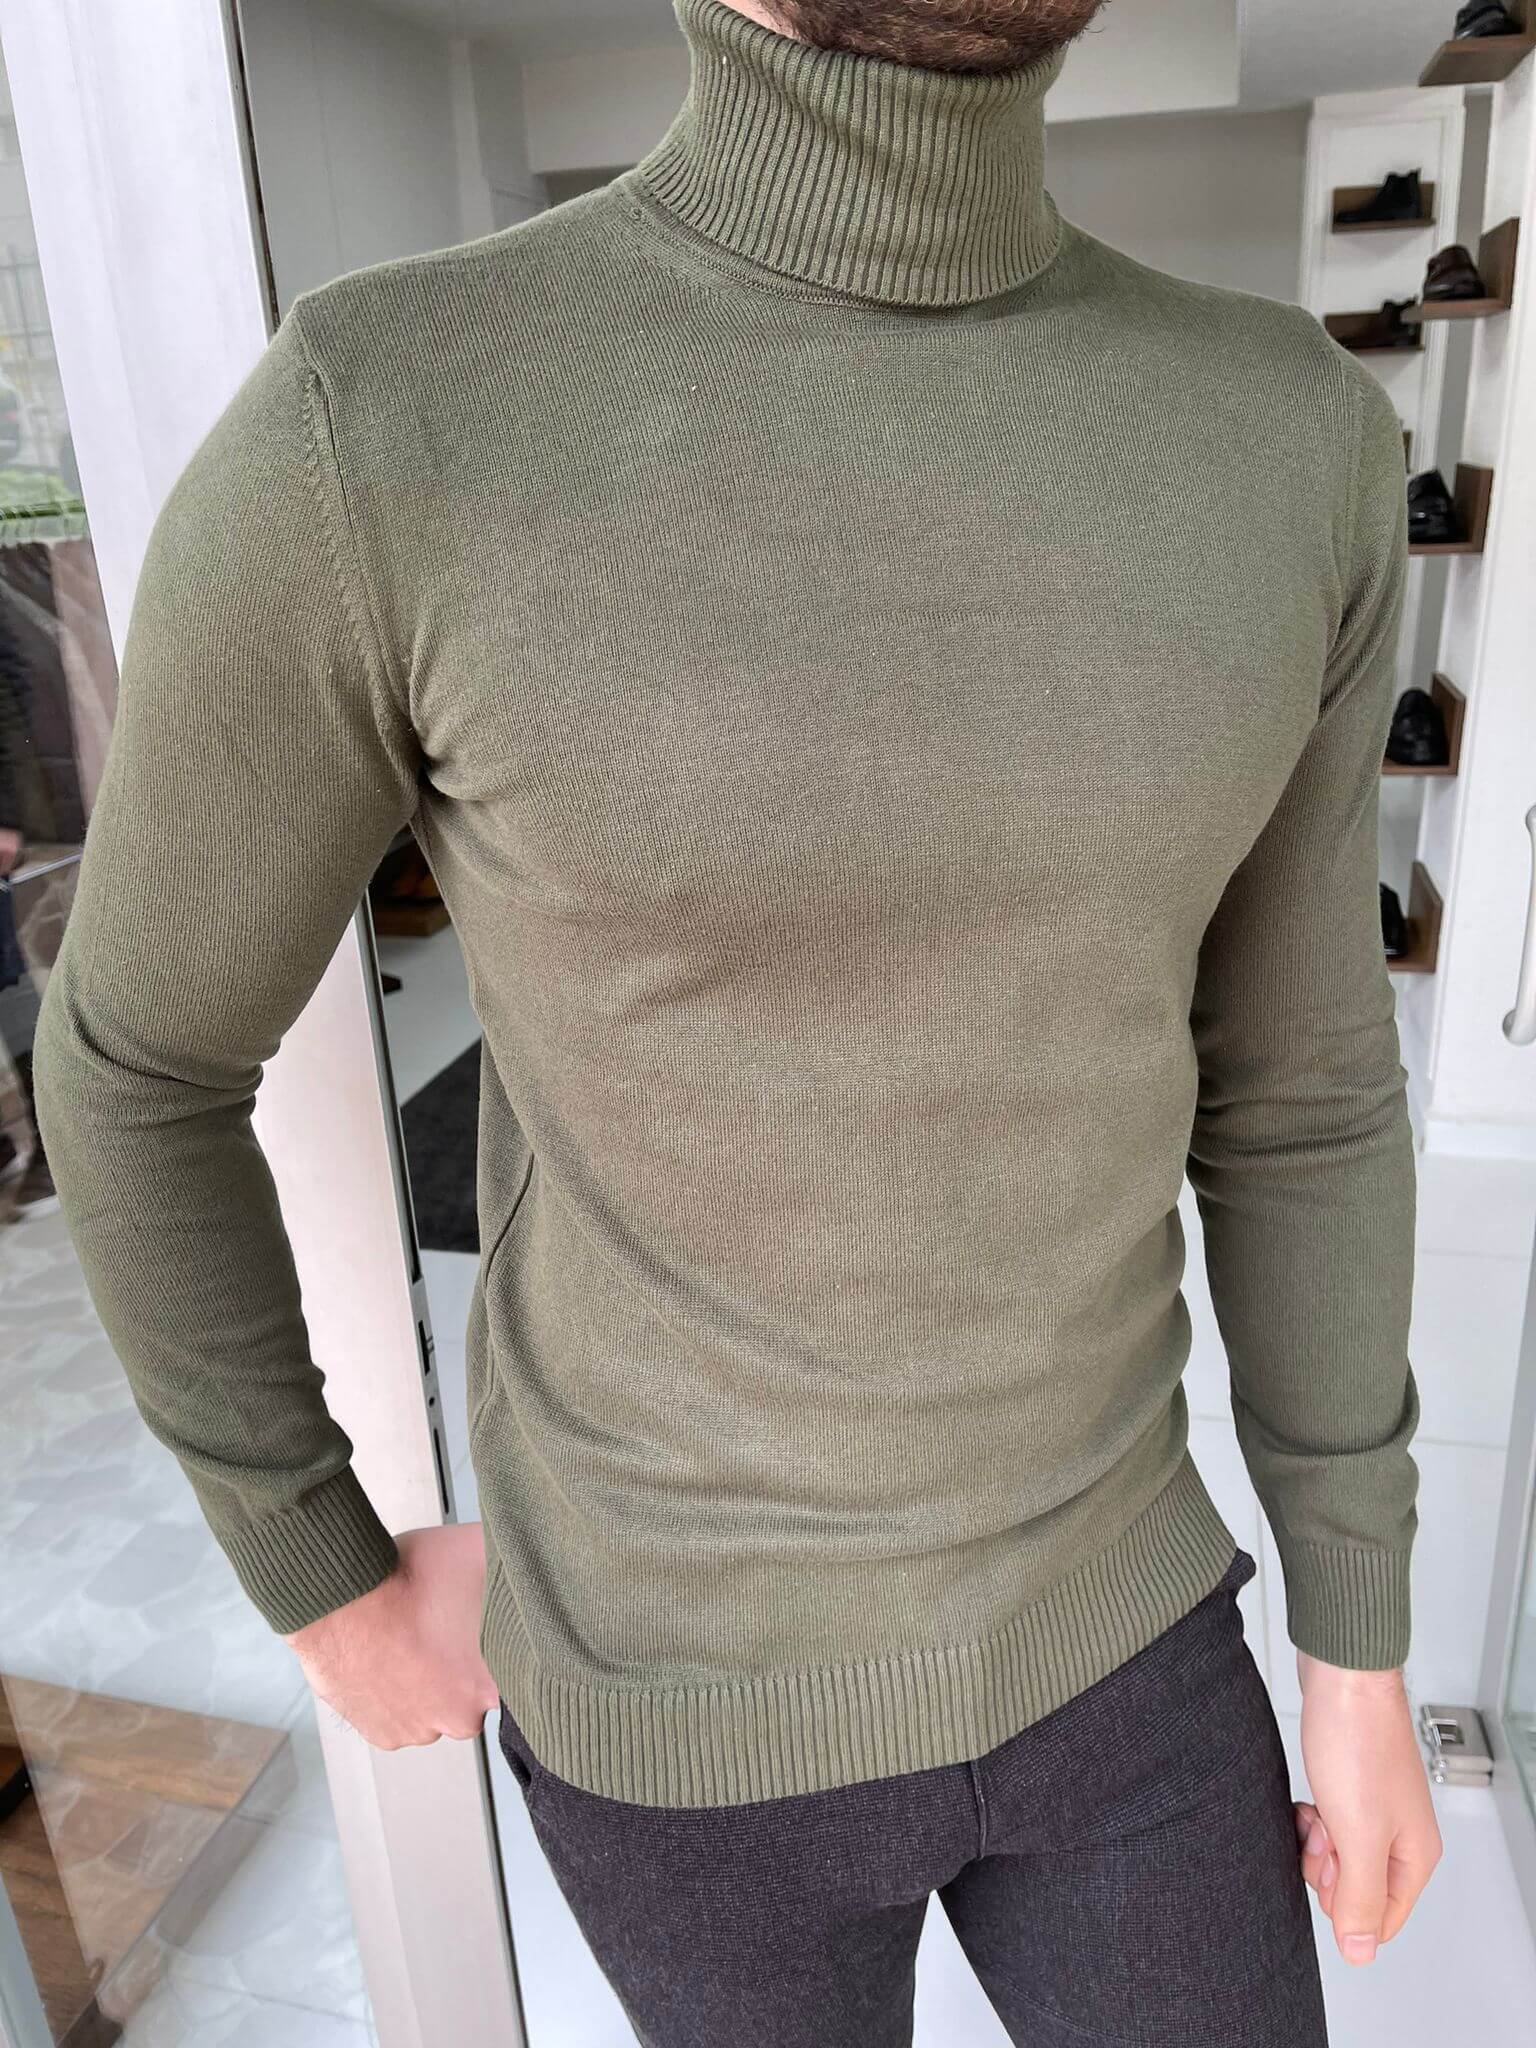 A khaki turtleneck sweater, a cozy and stylish garment with a high, folded collar, in a warm khaki color."